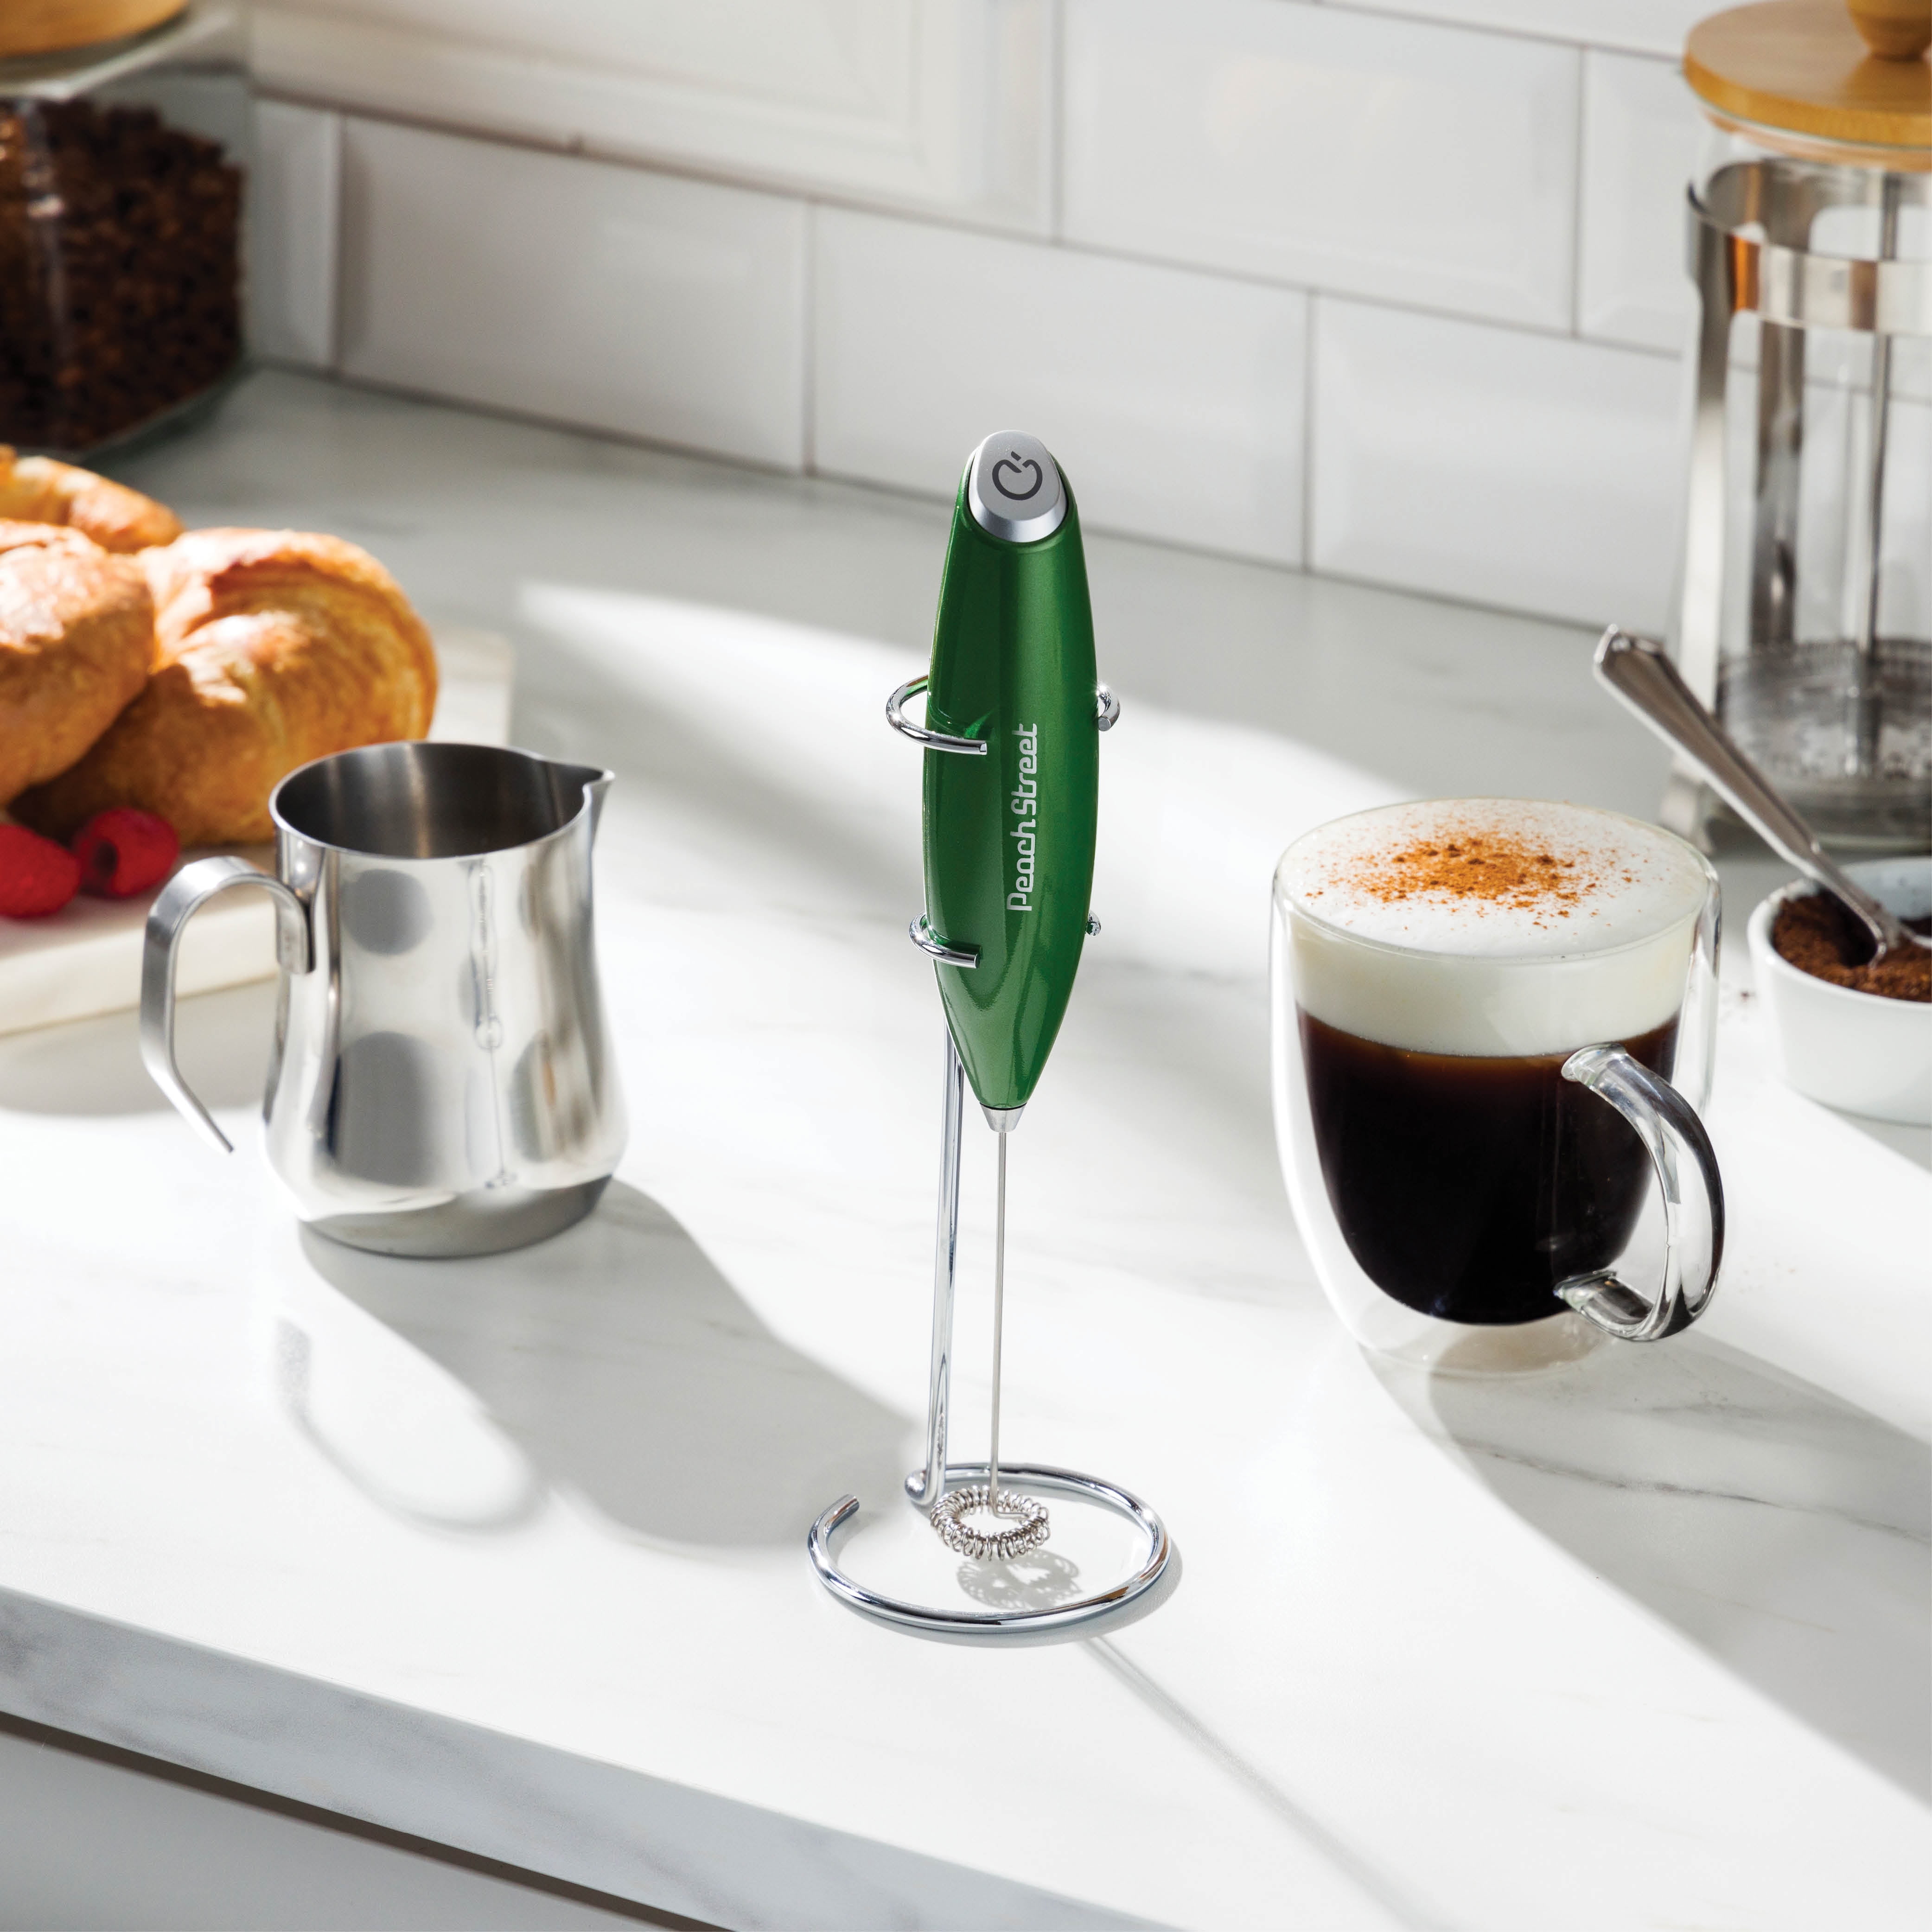 with Stand Handheld Whisk Drink Foamer Mini Blender Mixer for Coffee Frappe Matcha Espresso, Black